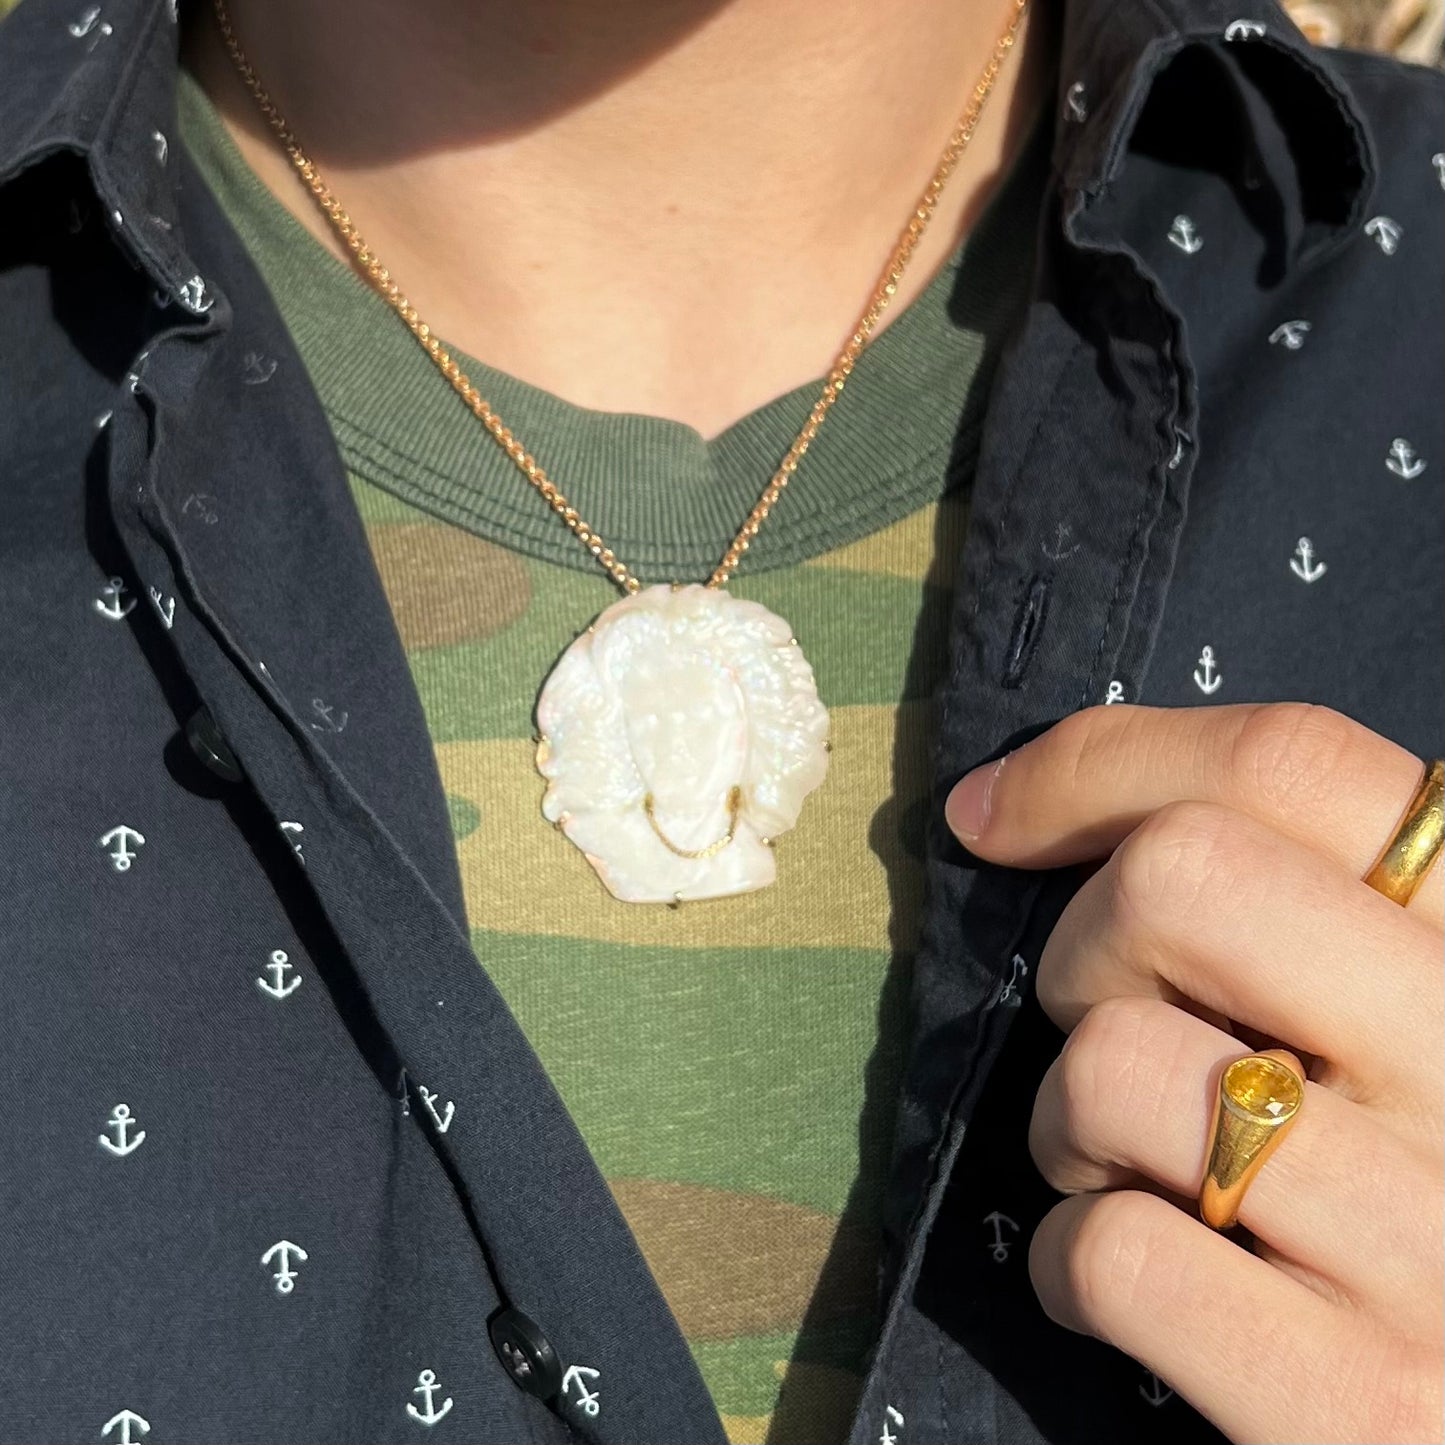 A cameo necklace carved by white crystal opal and held with gold prongs.  The cameo is wearing a gold chain.